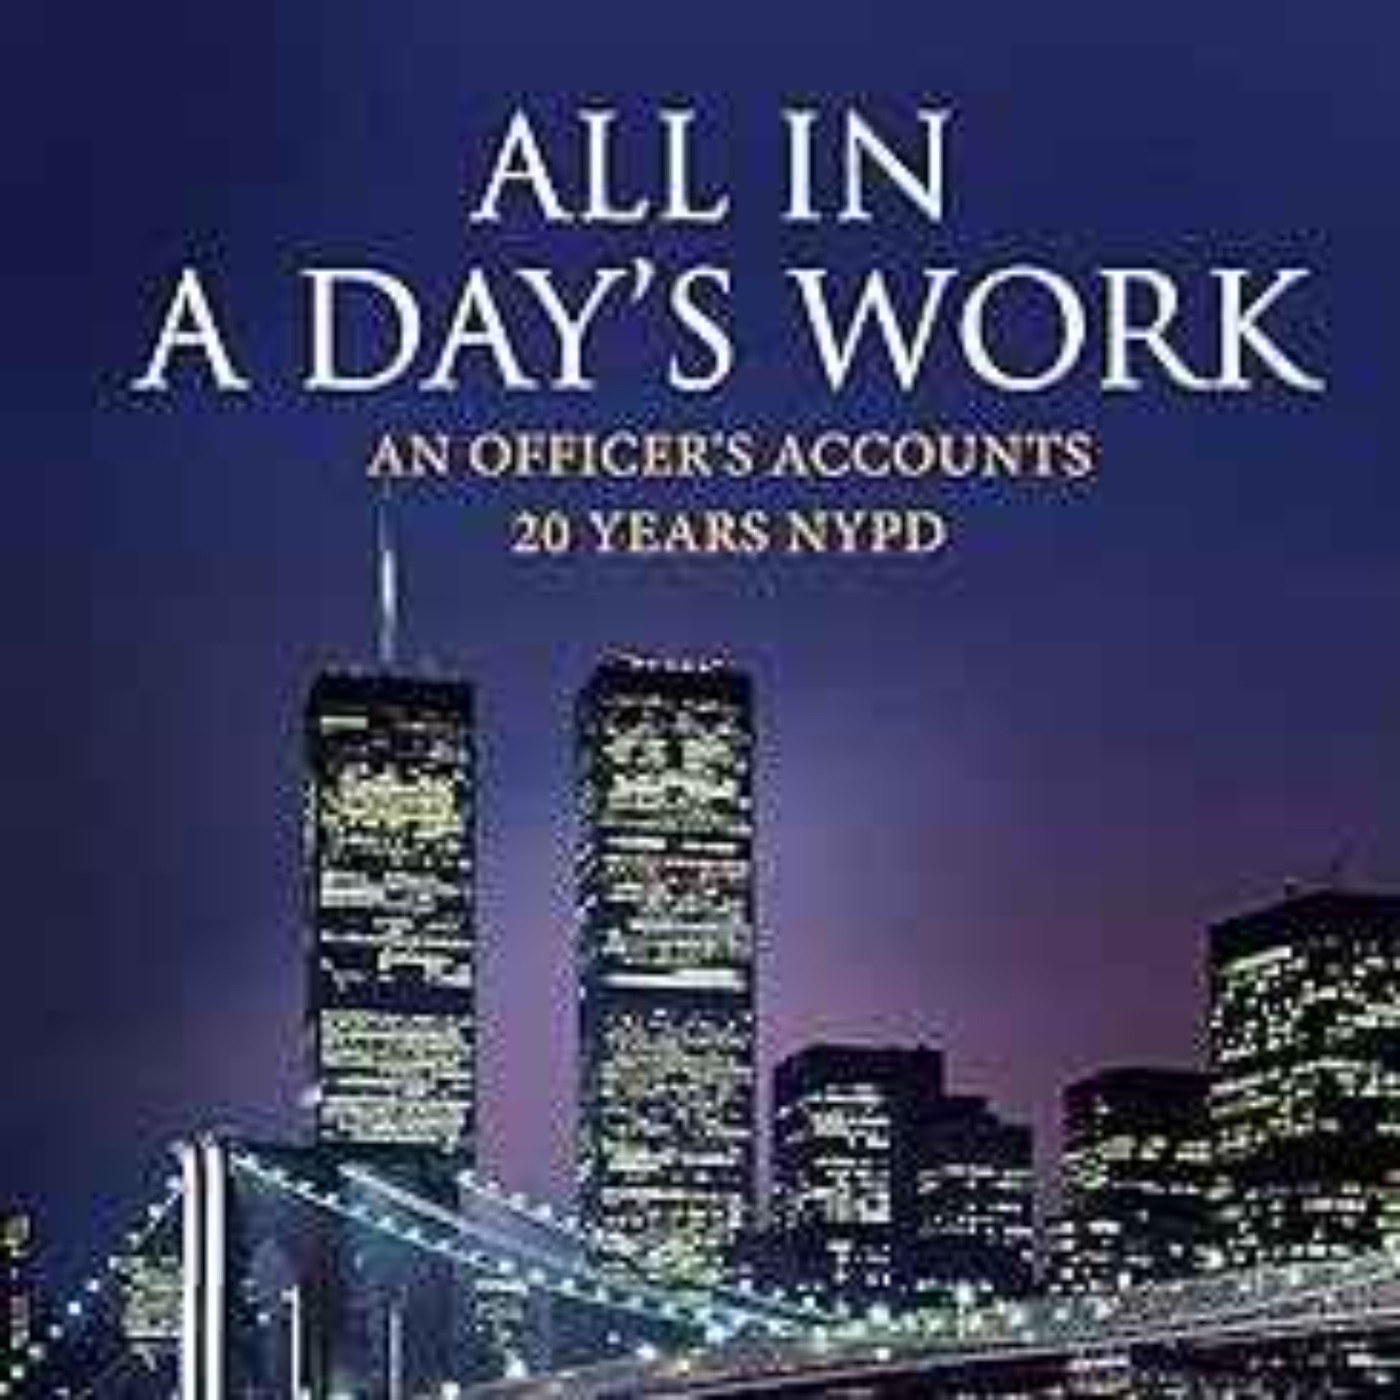 John Ferriso - All in a day’s work: An officer’s accounts 20 years NYPD